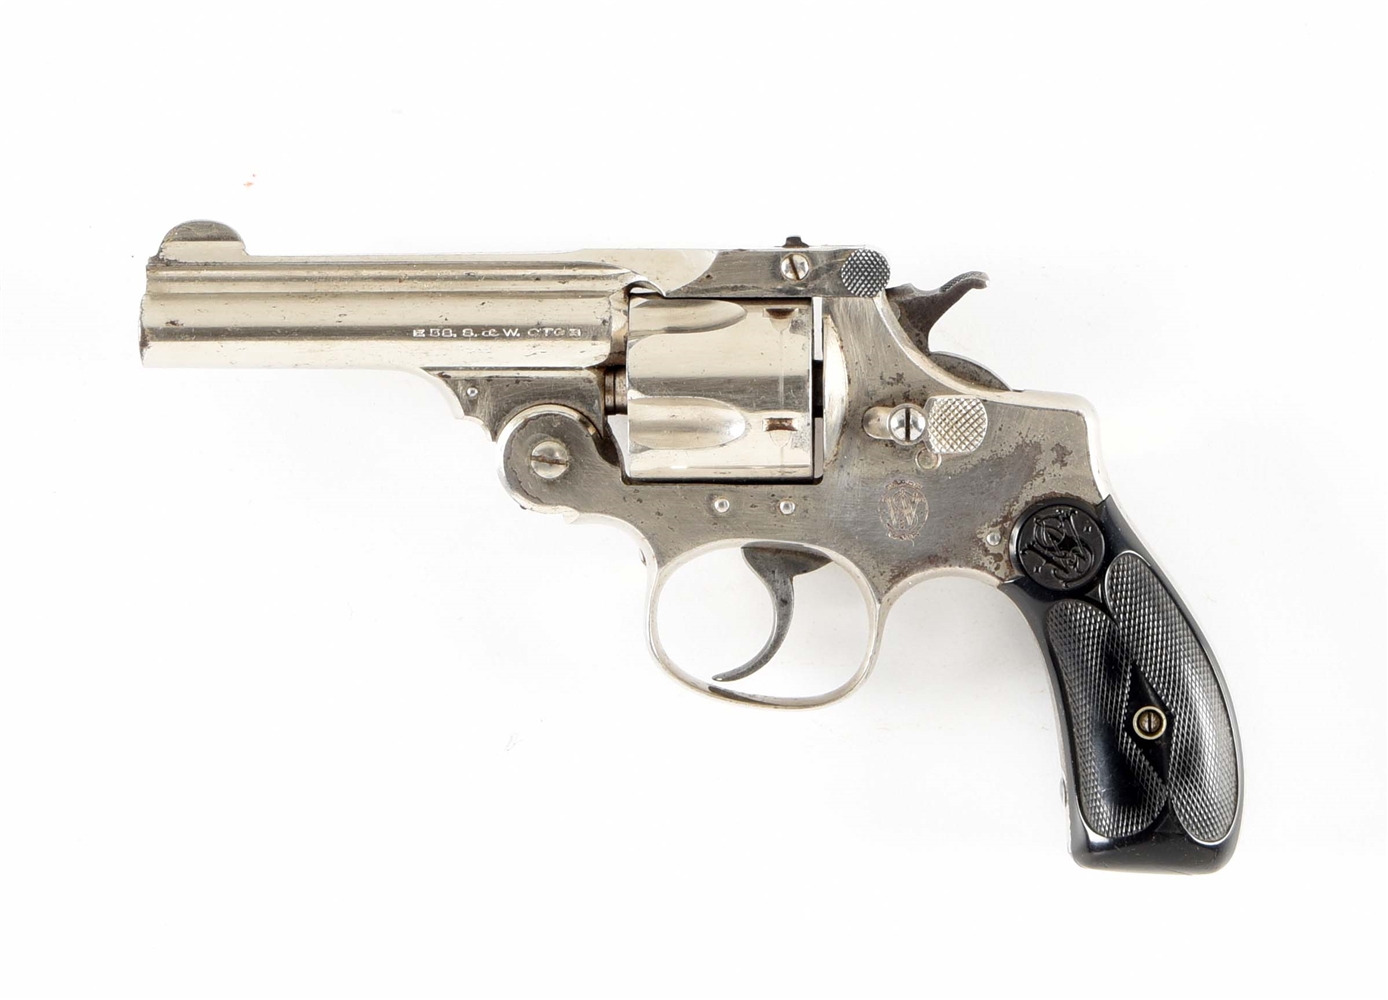 (C) SMITH & WESSON DOUBLE ACTION 38 PERFECTED TOP BREAK REVOVLER.